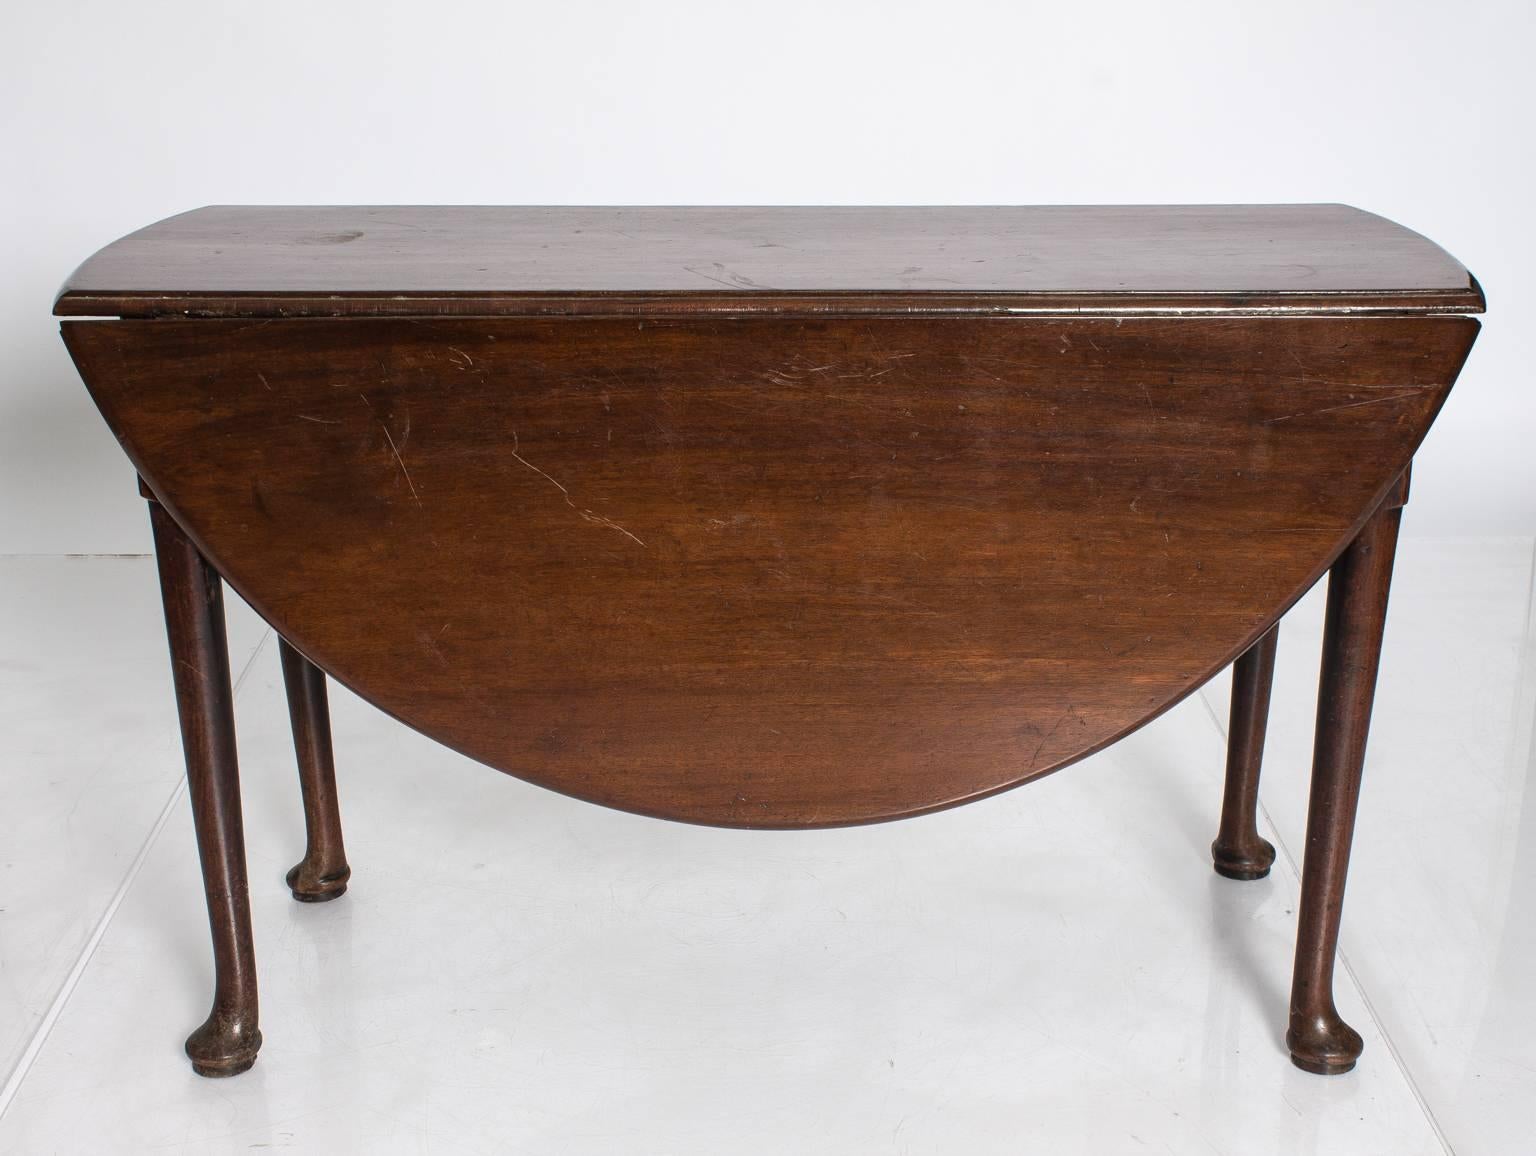 Mahogany Queen Anne Drop-Leaf Table